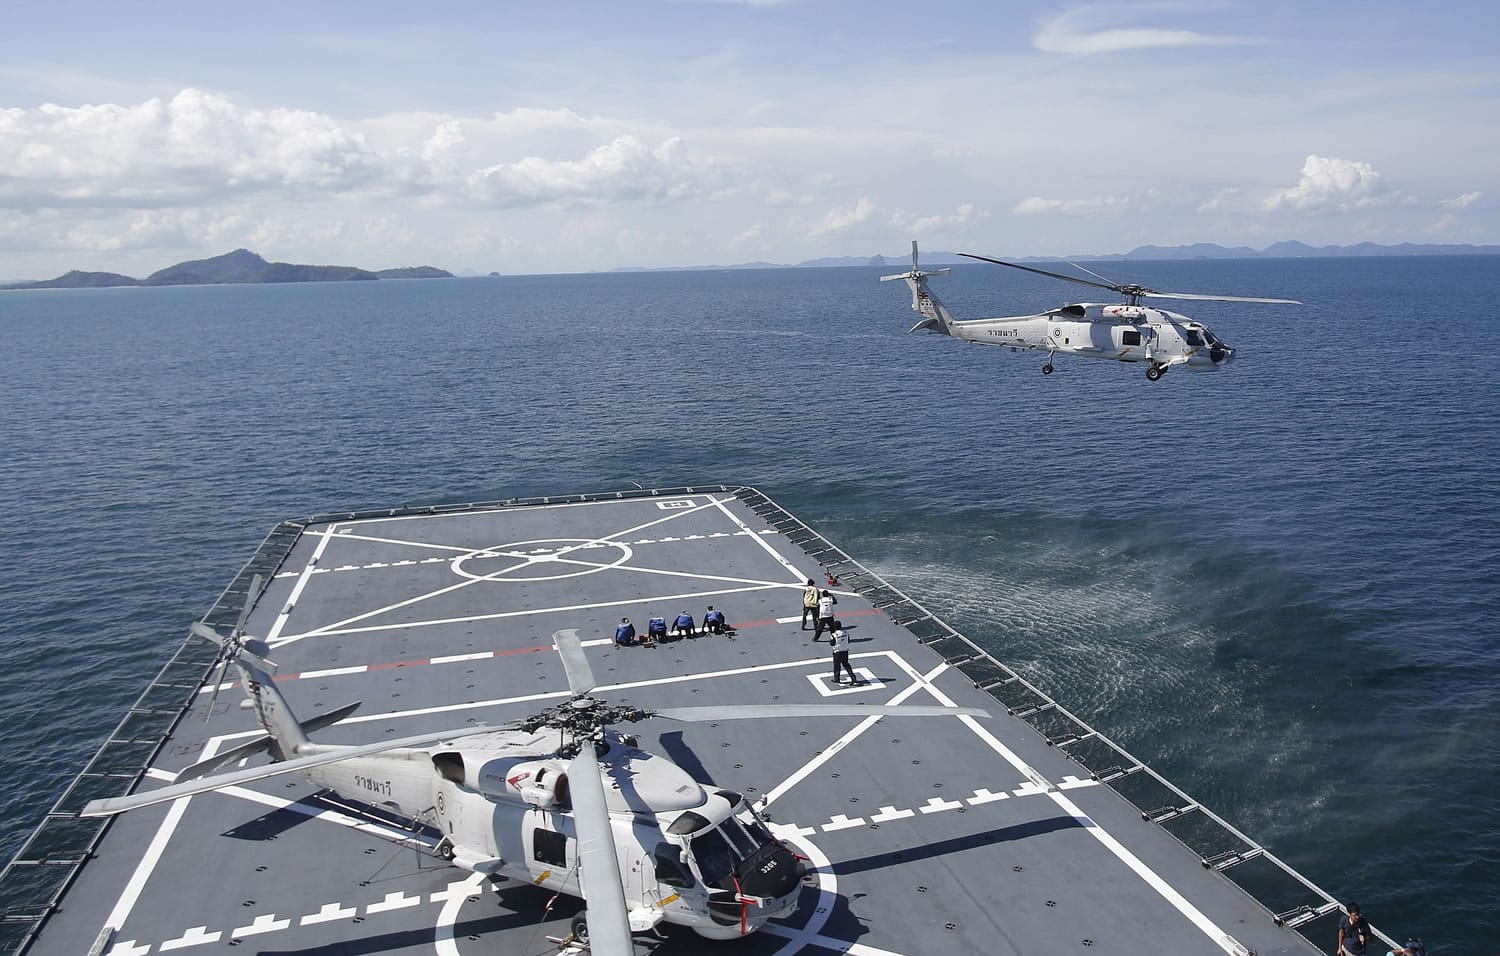 A helicopter takes off from HTMS Angthonga helipad before a patrol demonstration to the media on a Thai naval ship in Phuket province Friday, May 29, 2015. The ship will serve as a floating base to support the Thai navy's mission to search and give humanitarian assistance to the migrants drifting on boats near the Thai maritime border.